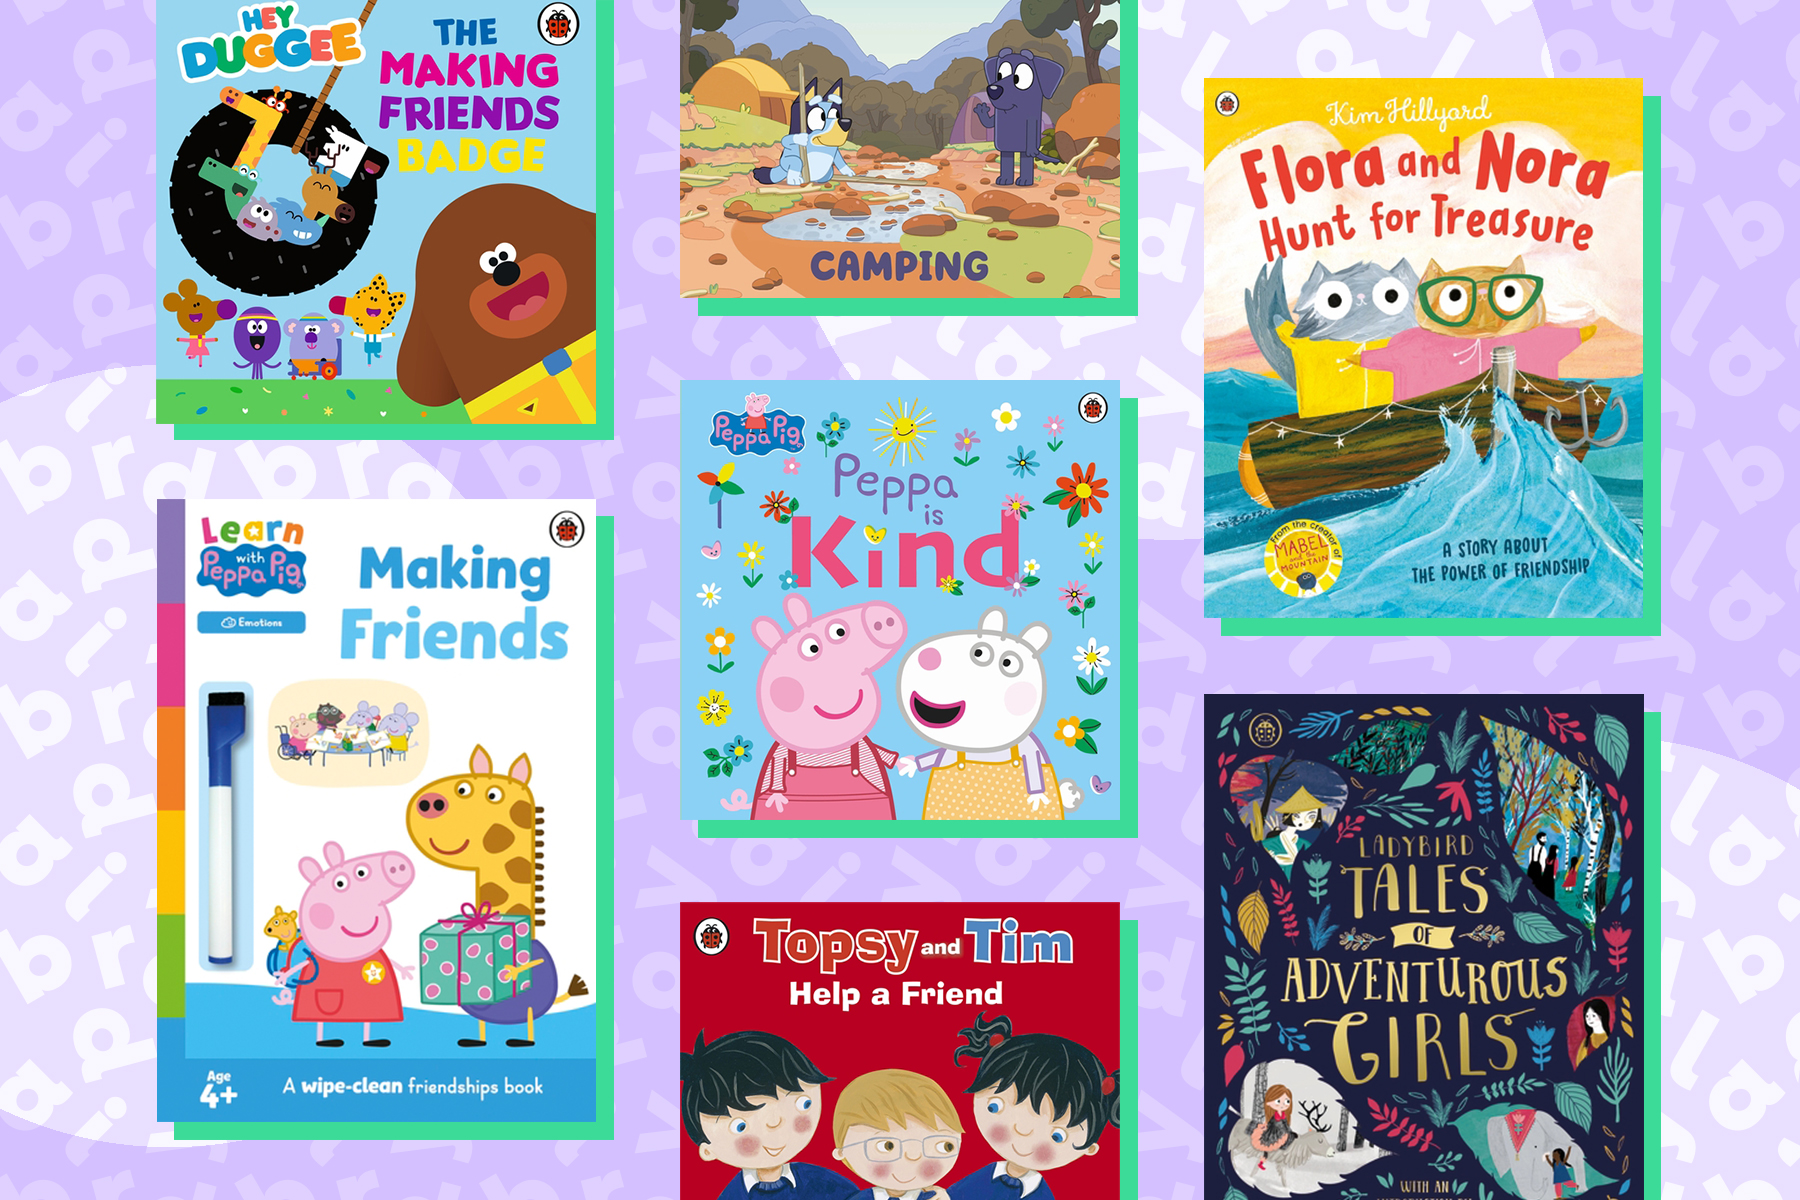 An image of a selection of books about friendship on a light purple backgrounf with a Ladybird font patter.